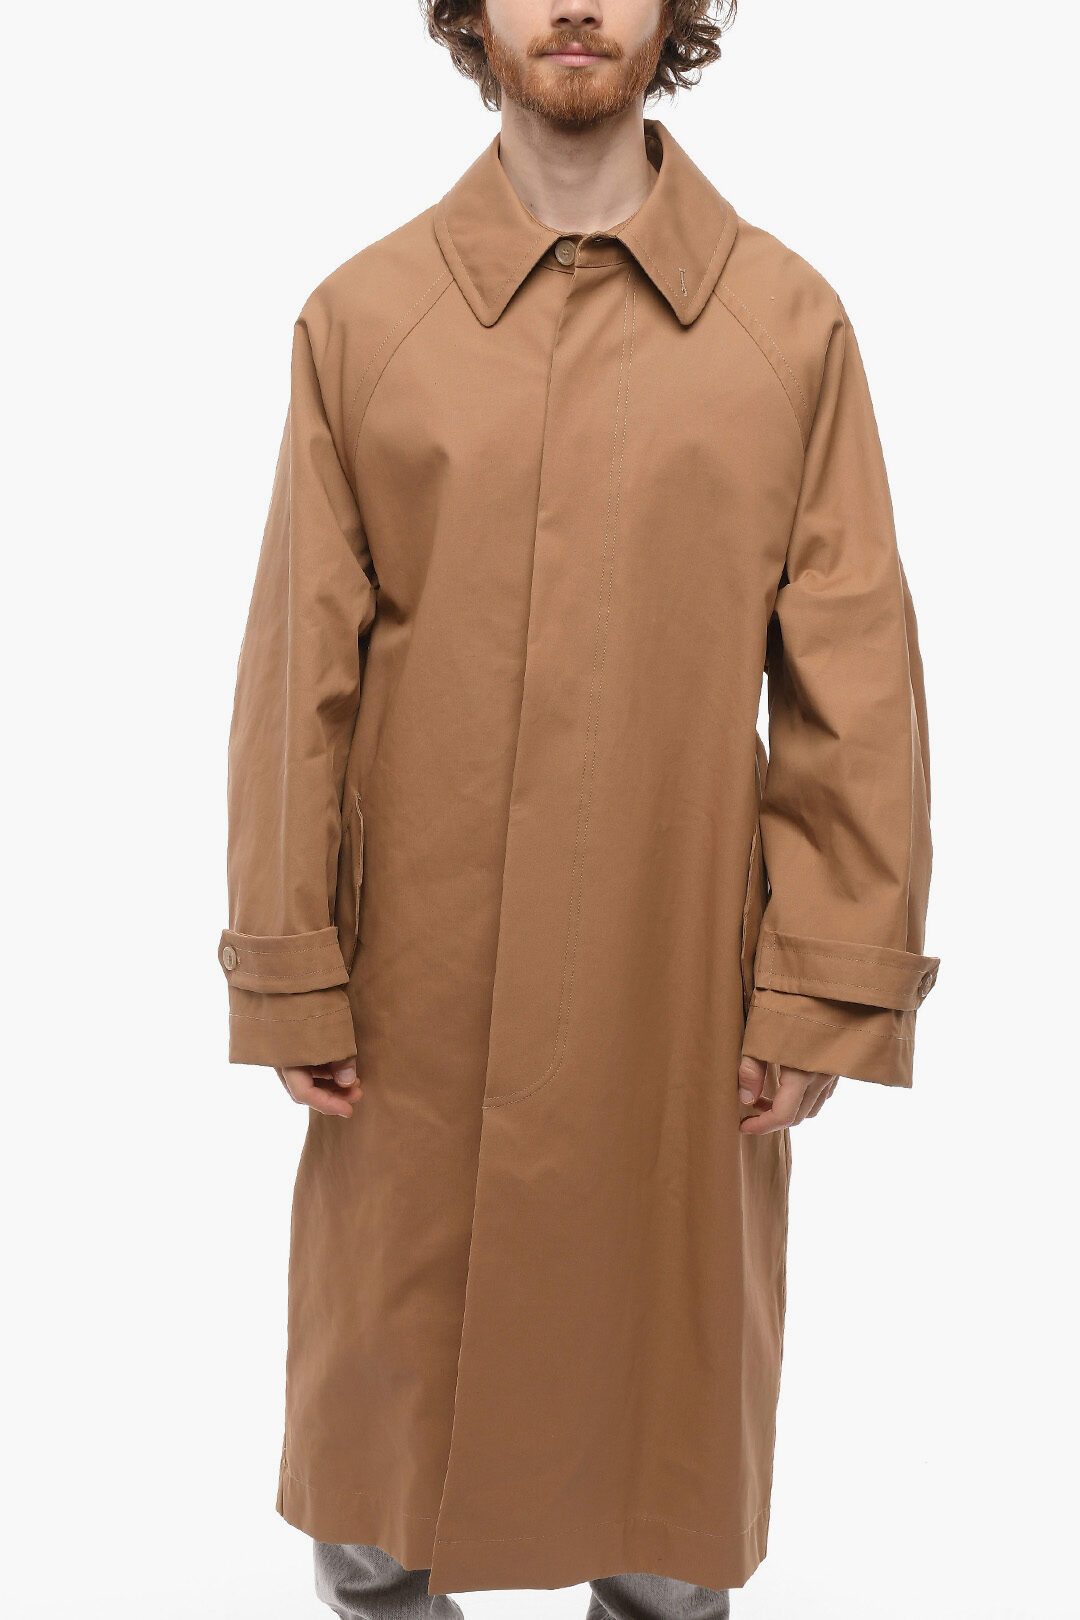 Hed Mayner Coated Cotton Trench Coat with Flap Pockets men 